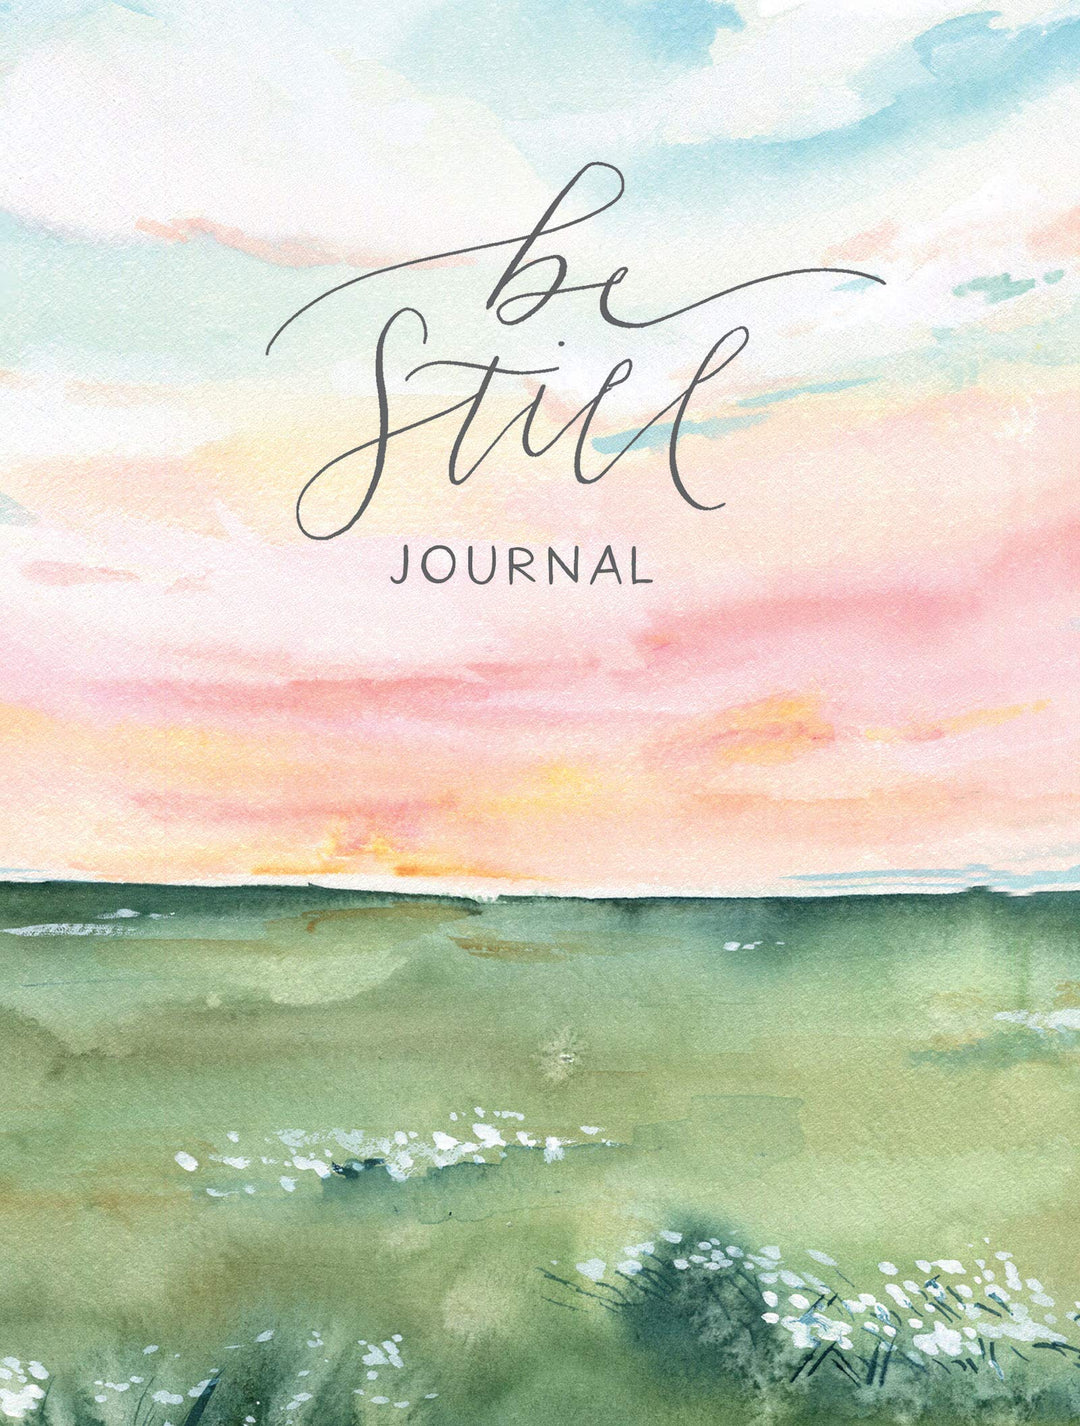 BE STILL JOURNAL - Kingfisher Road - Online Boutique